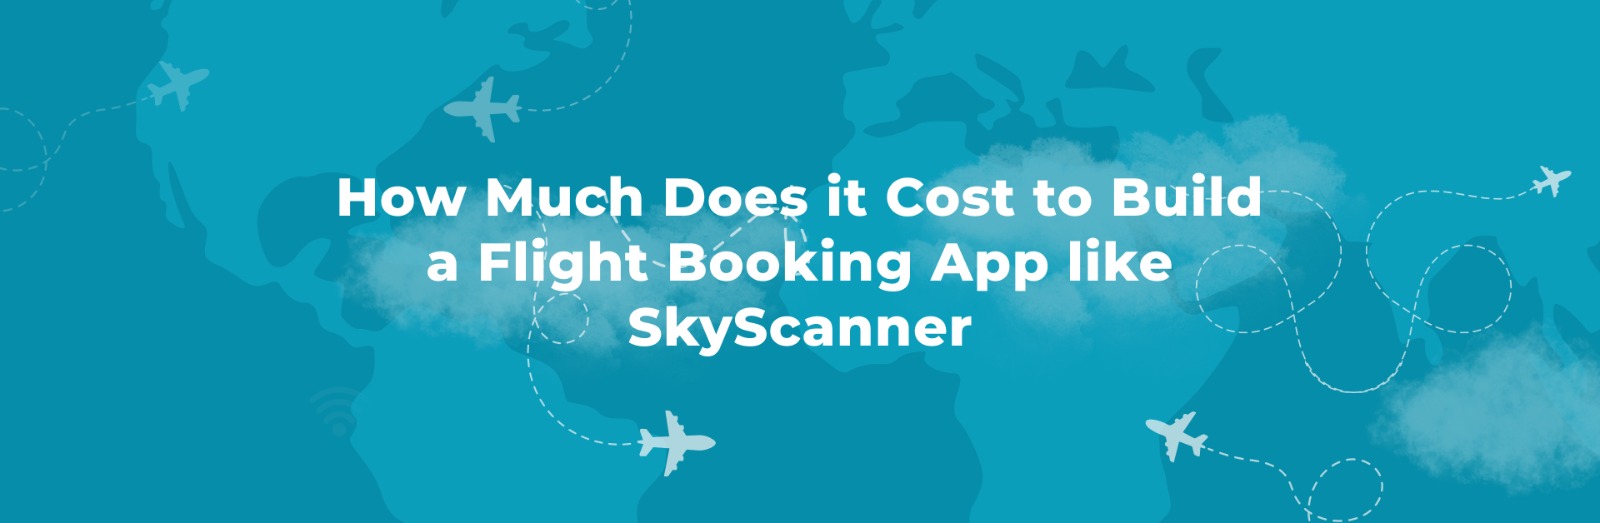 How Much Does it Cost to Build a Flight Booking App like SkyScanner